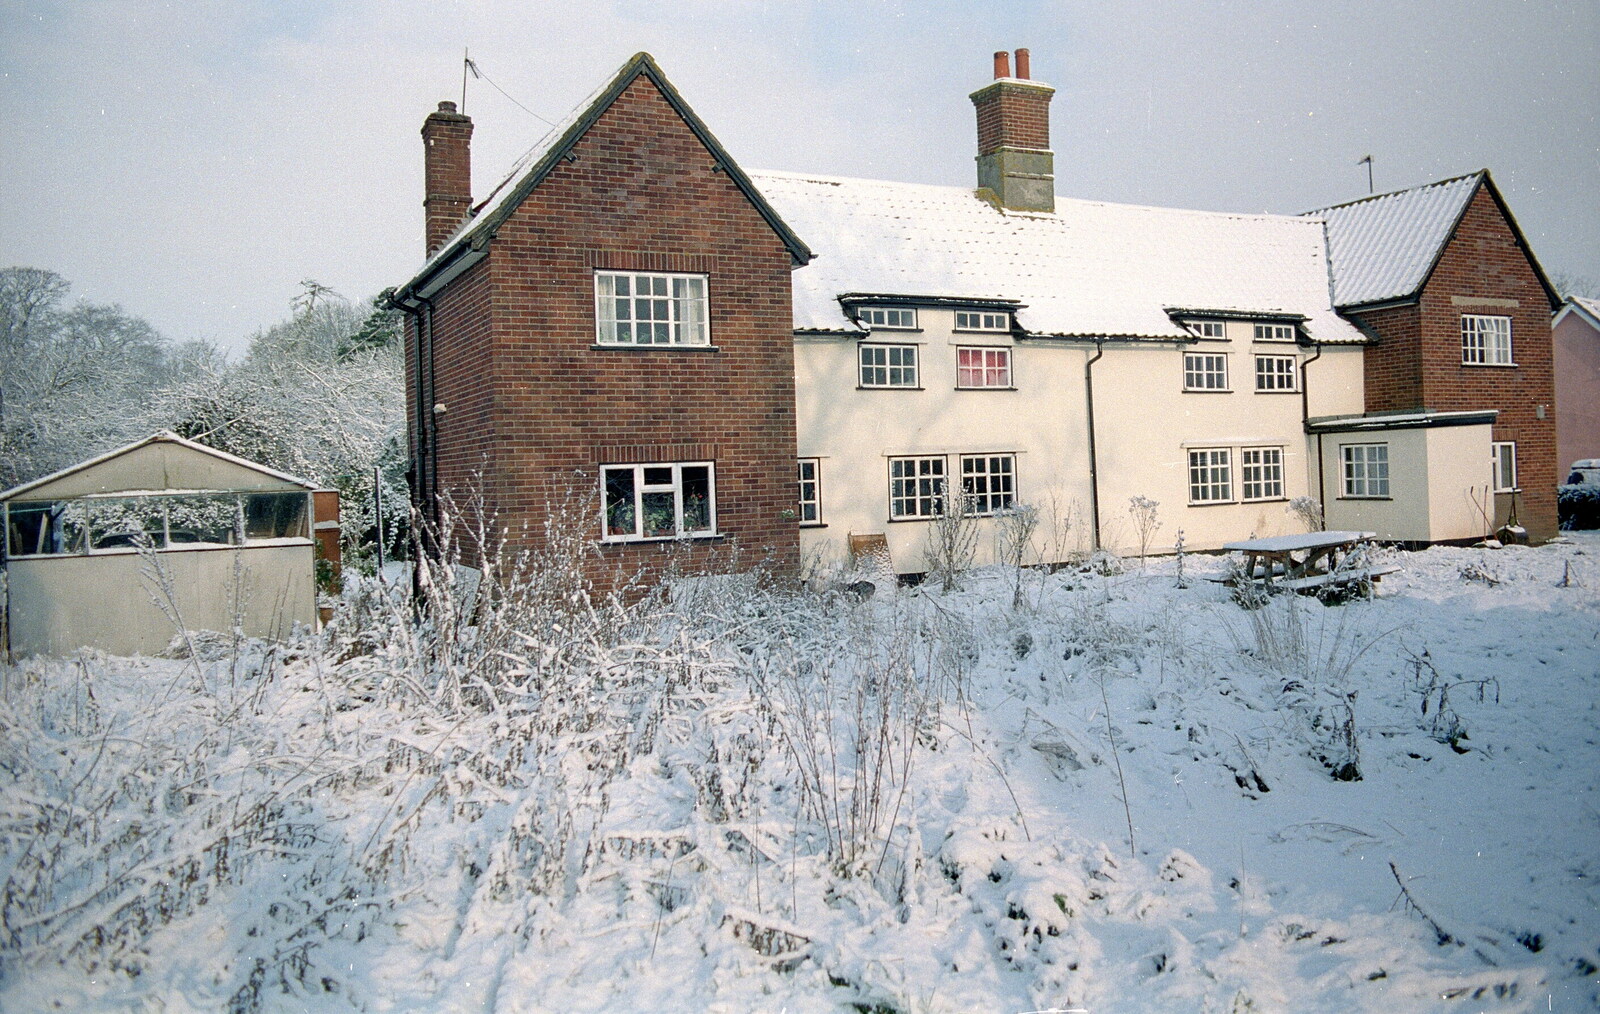 The back garden from New Year's Eve at the Swan Inn, Brome, Suffolk - 31st December 1994